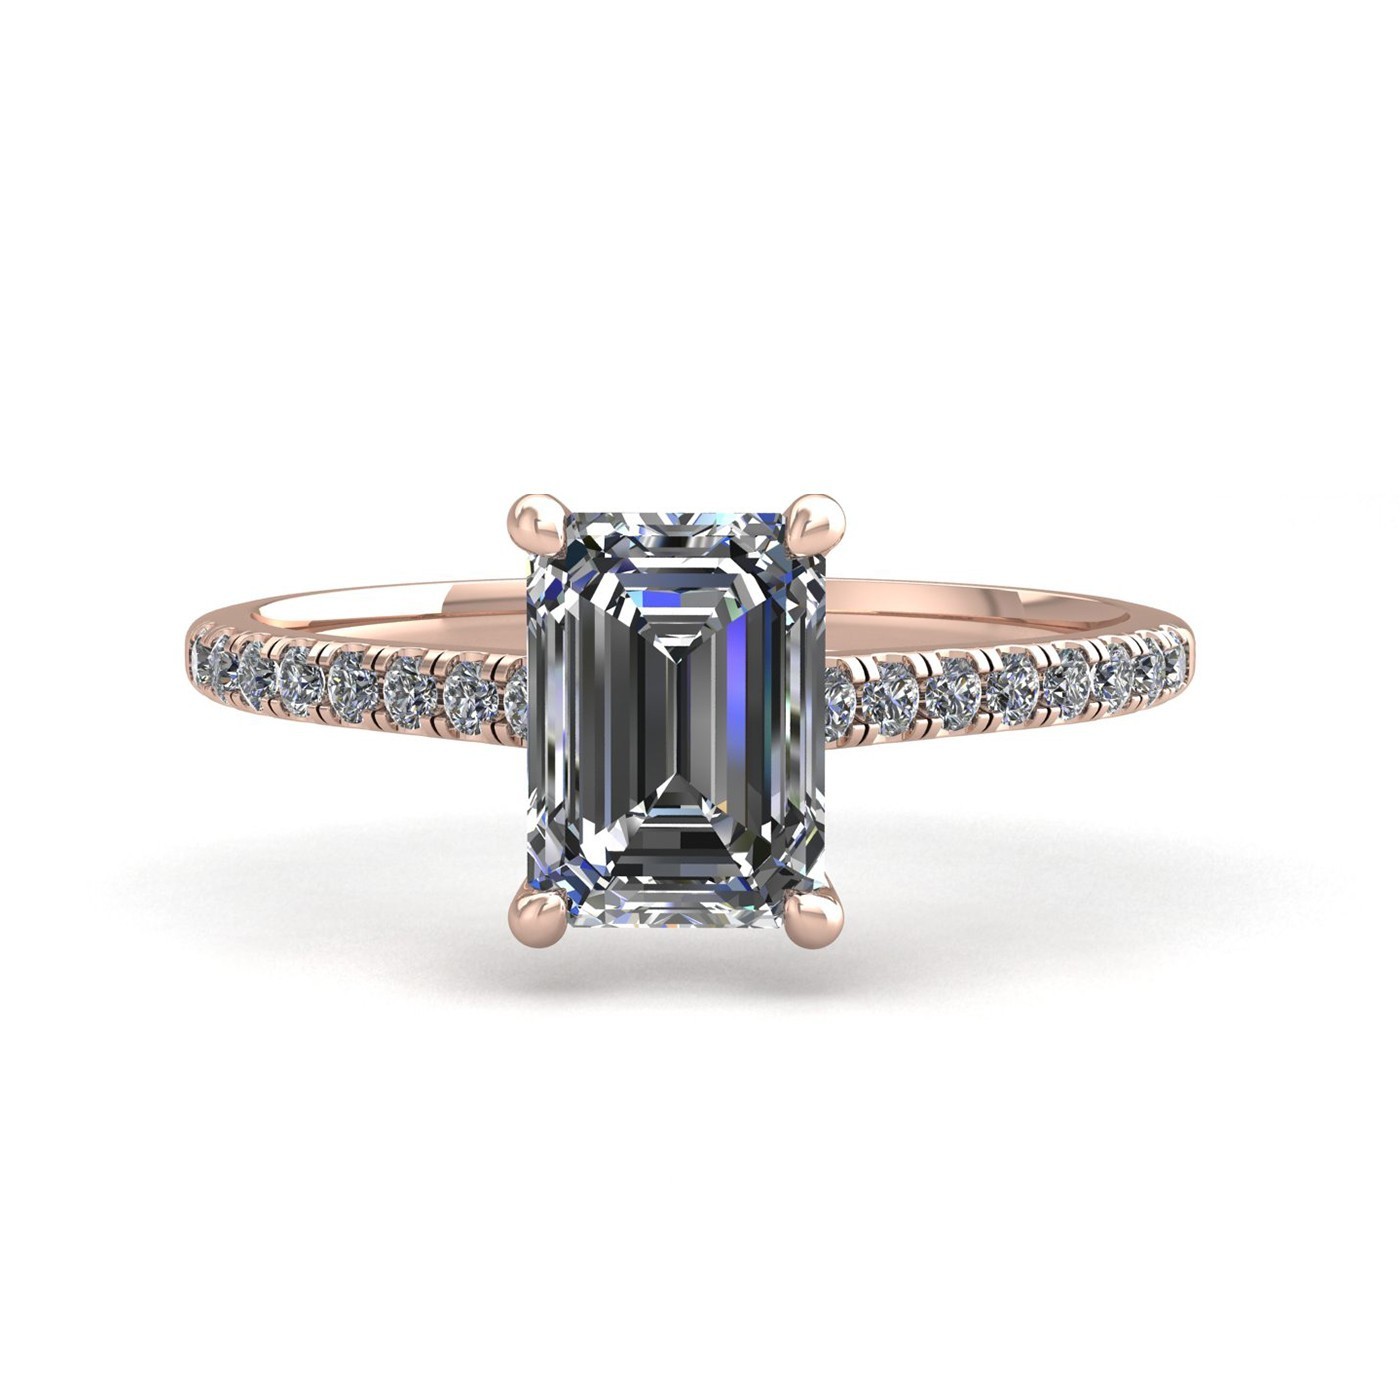 18k rose gold 1.0ct 4 prongs emerald cut diamond engagement ring with whisper thin pavÉ set band